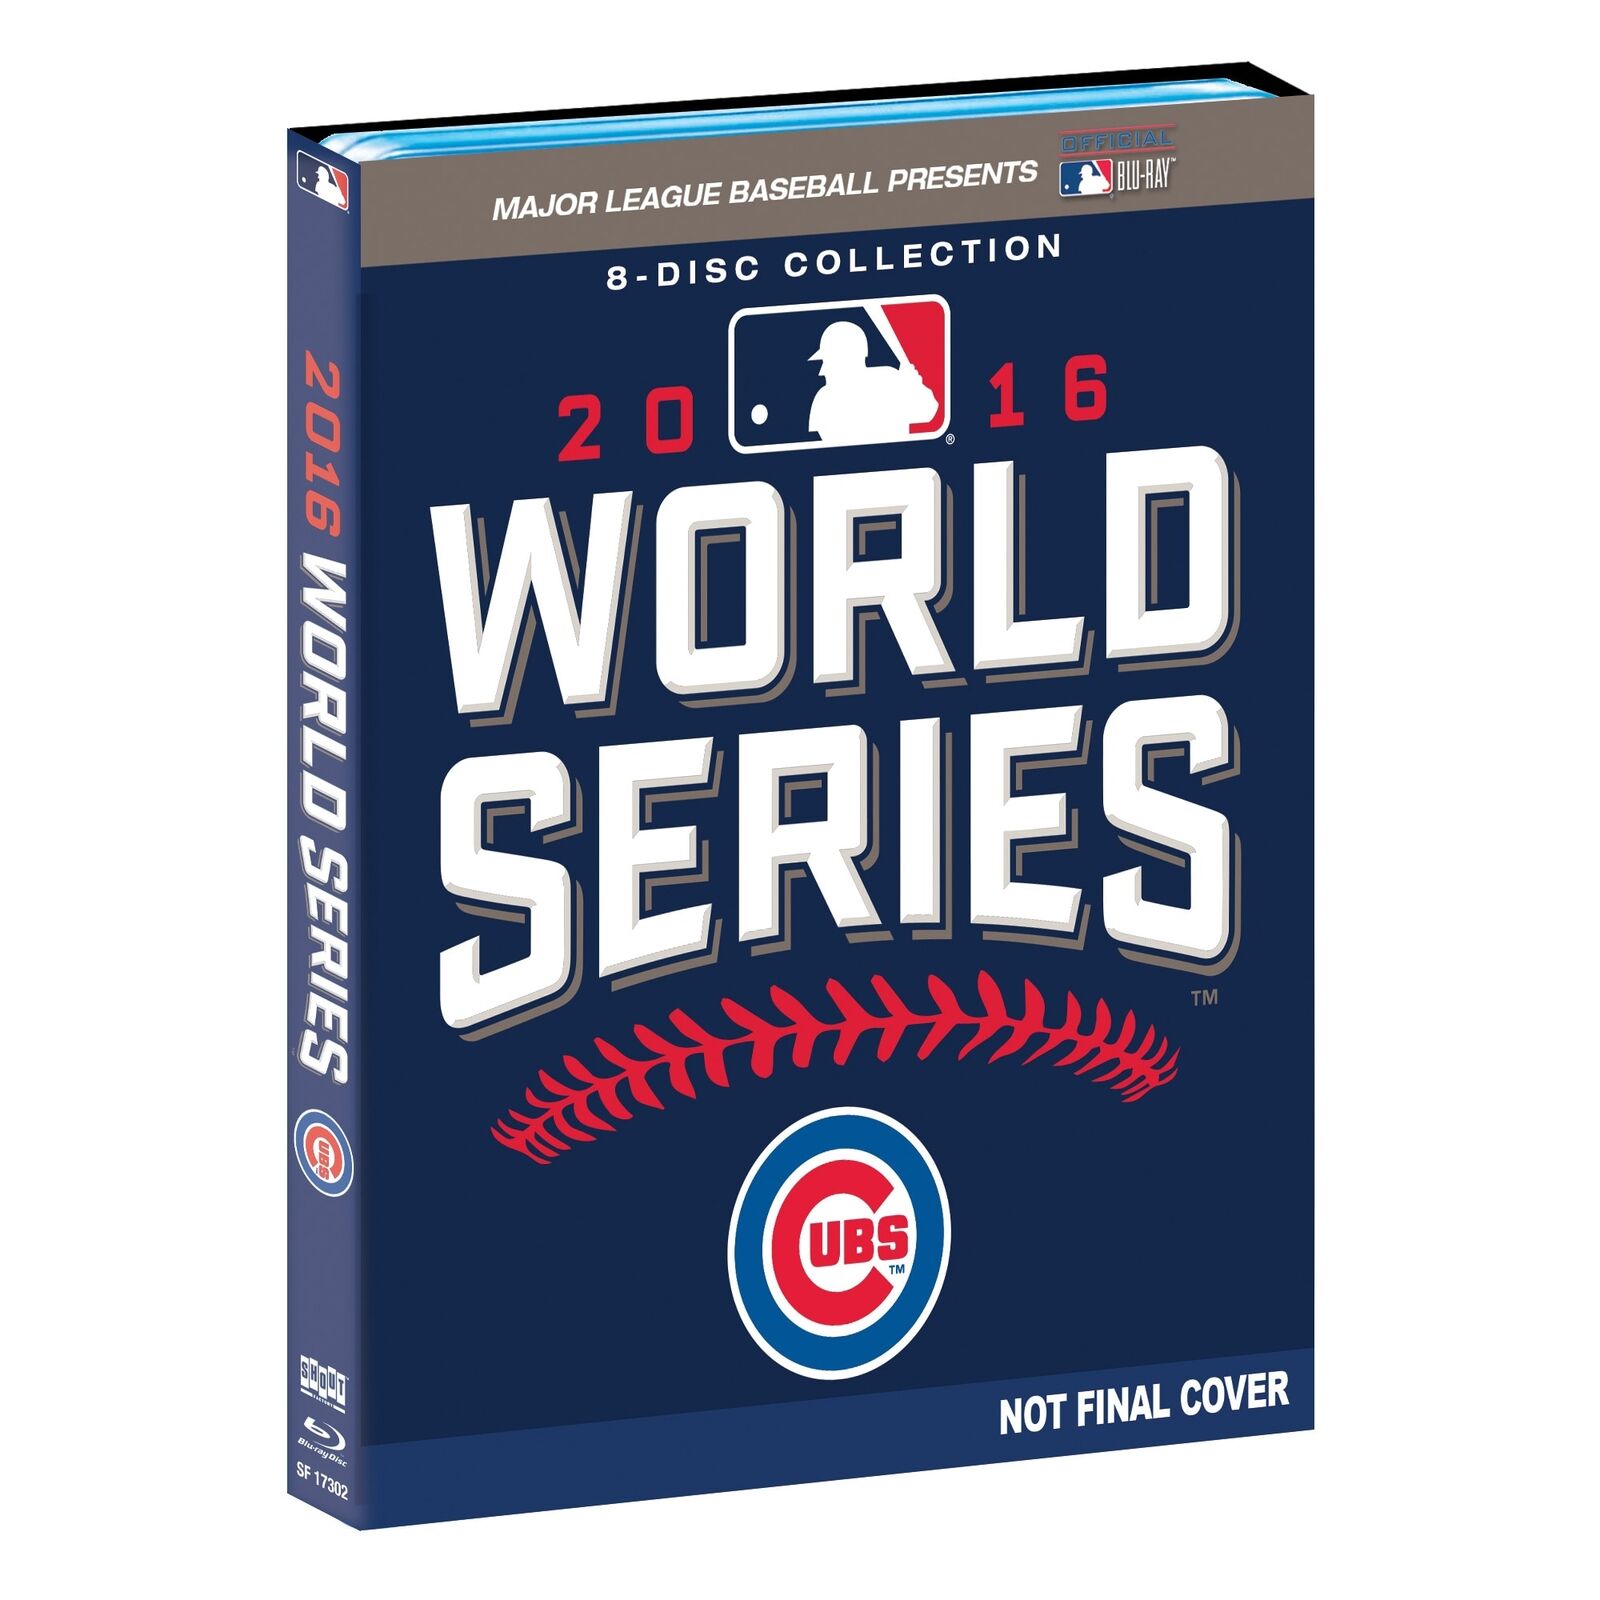 Chicago Cubs 2016 World Series Champions Commemorative 8-Disc Set